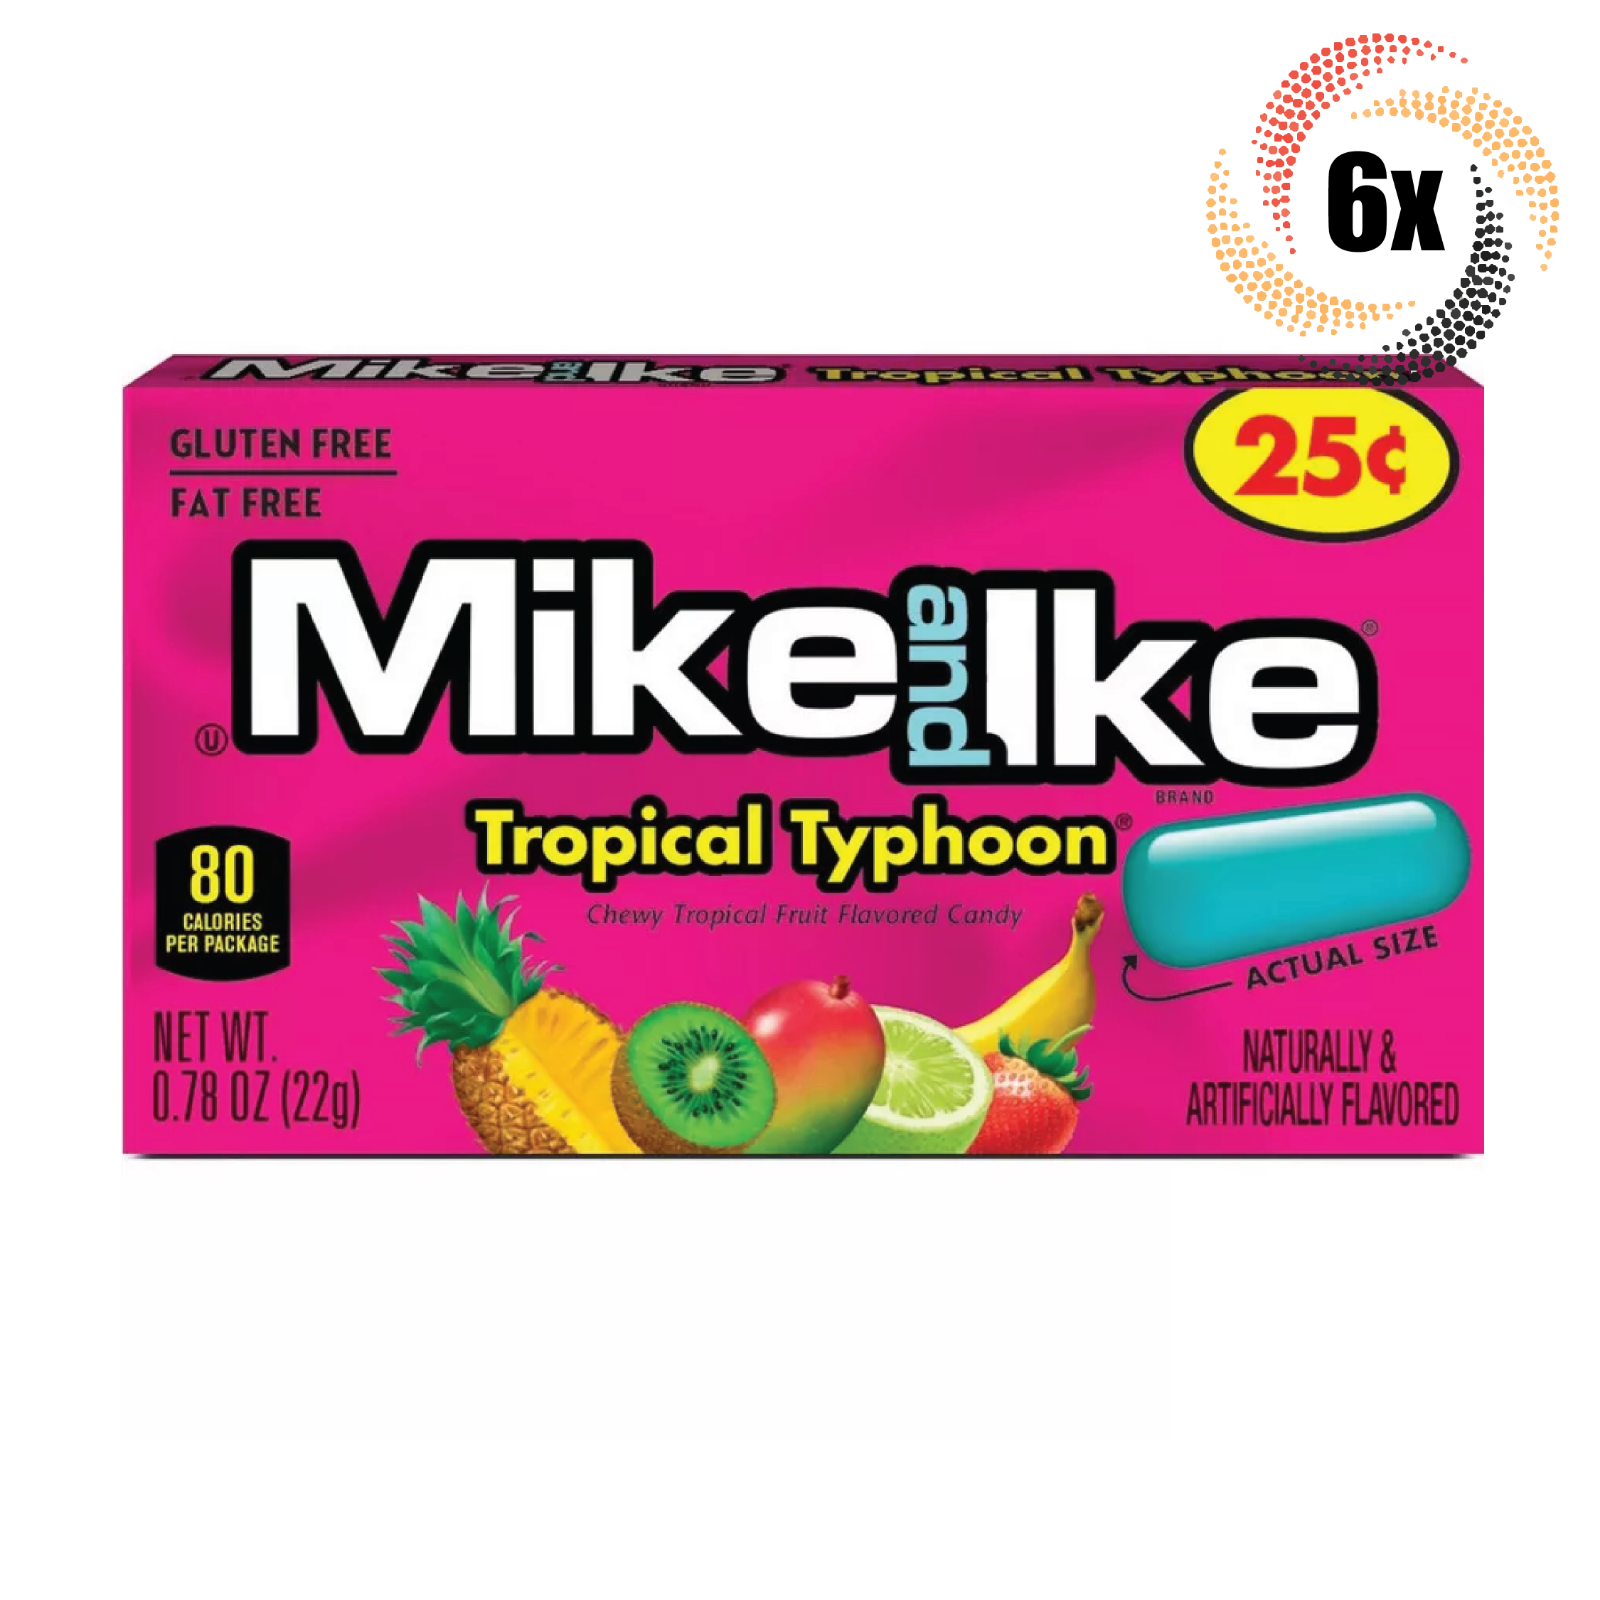 Primary image for 6x Packs Mike & Ike Tropical Typhoon Chewy Candy | .78oz | Fat & Gluten Free